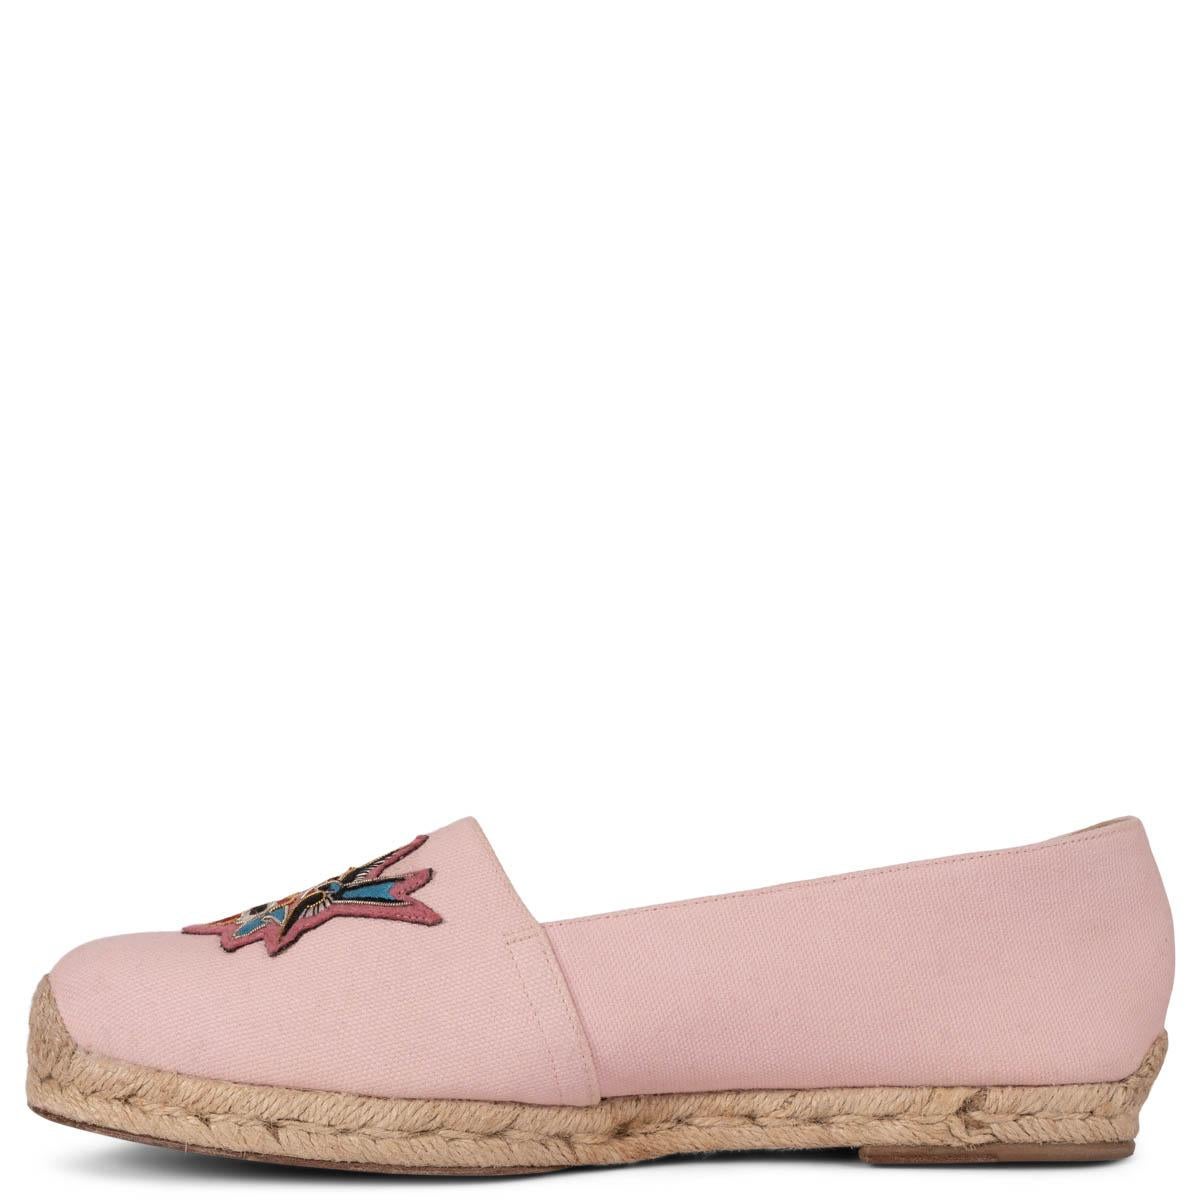 Women's CHRISTIAN LOUBOUTIN pink canvas MOM AND DAD ESPADRILLES Shoes 39 fit 38.5 For Sale